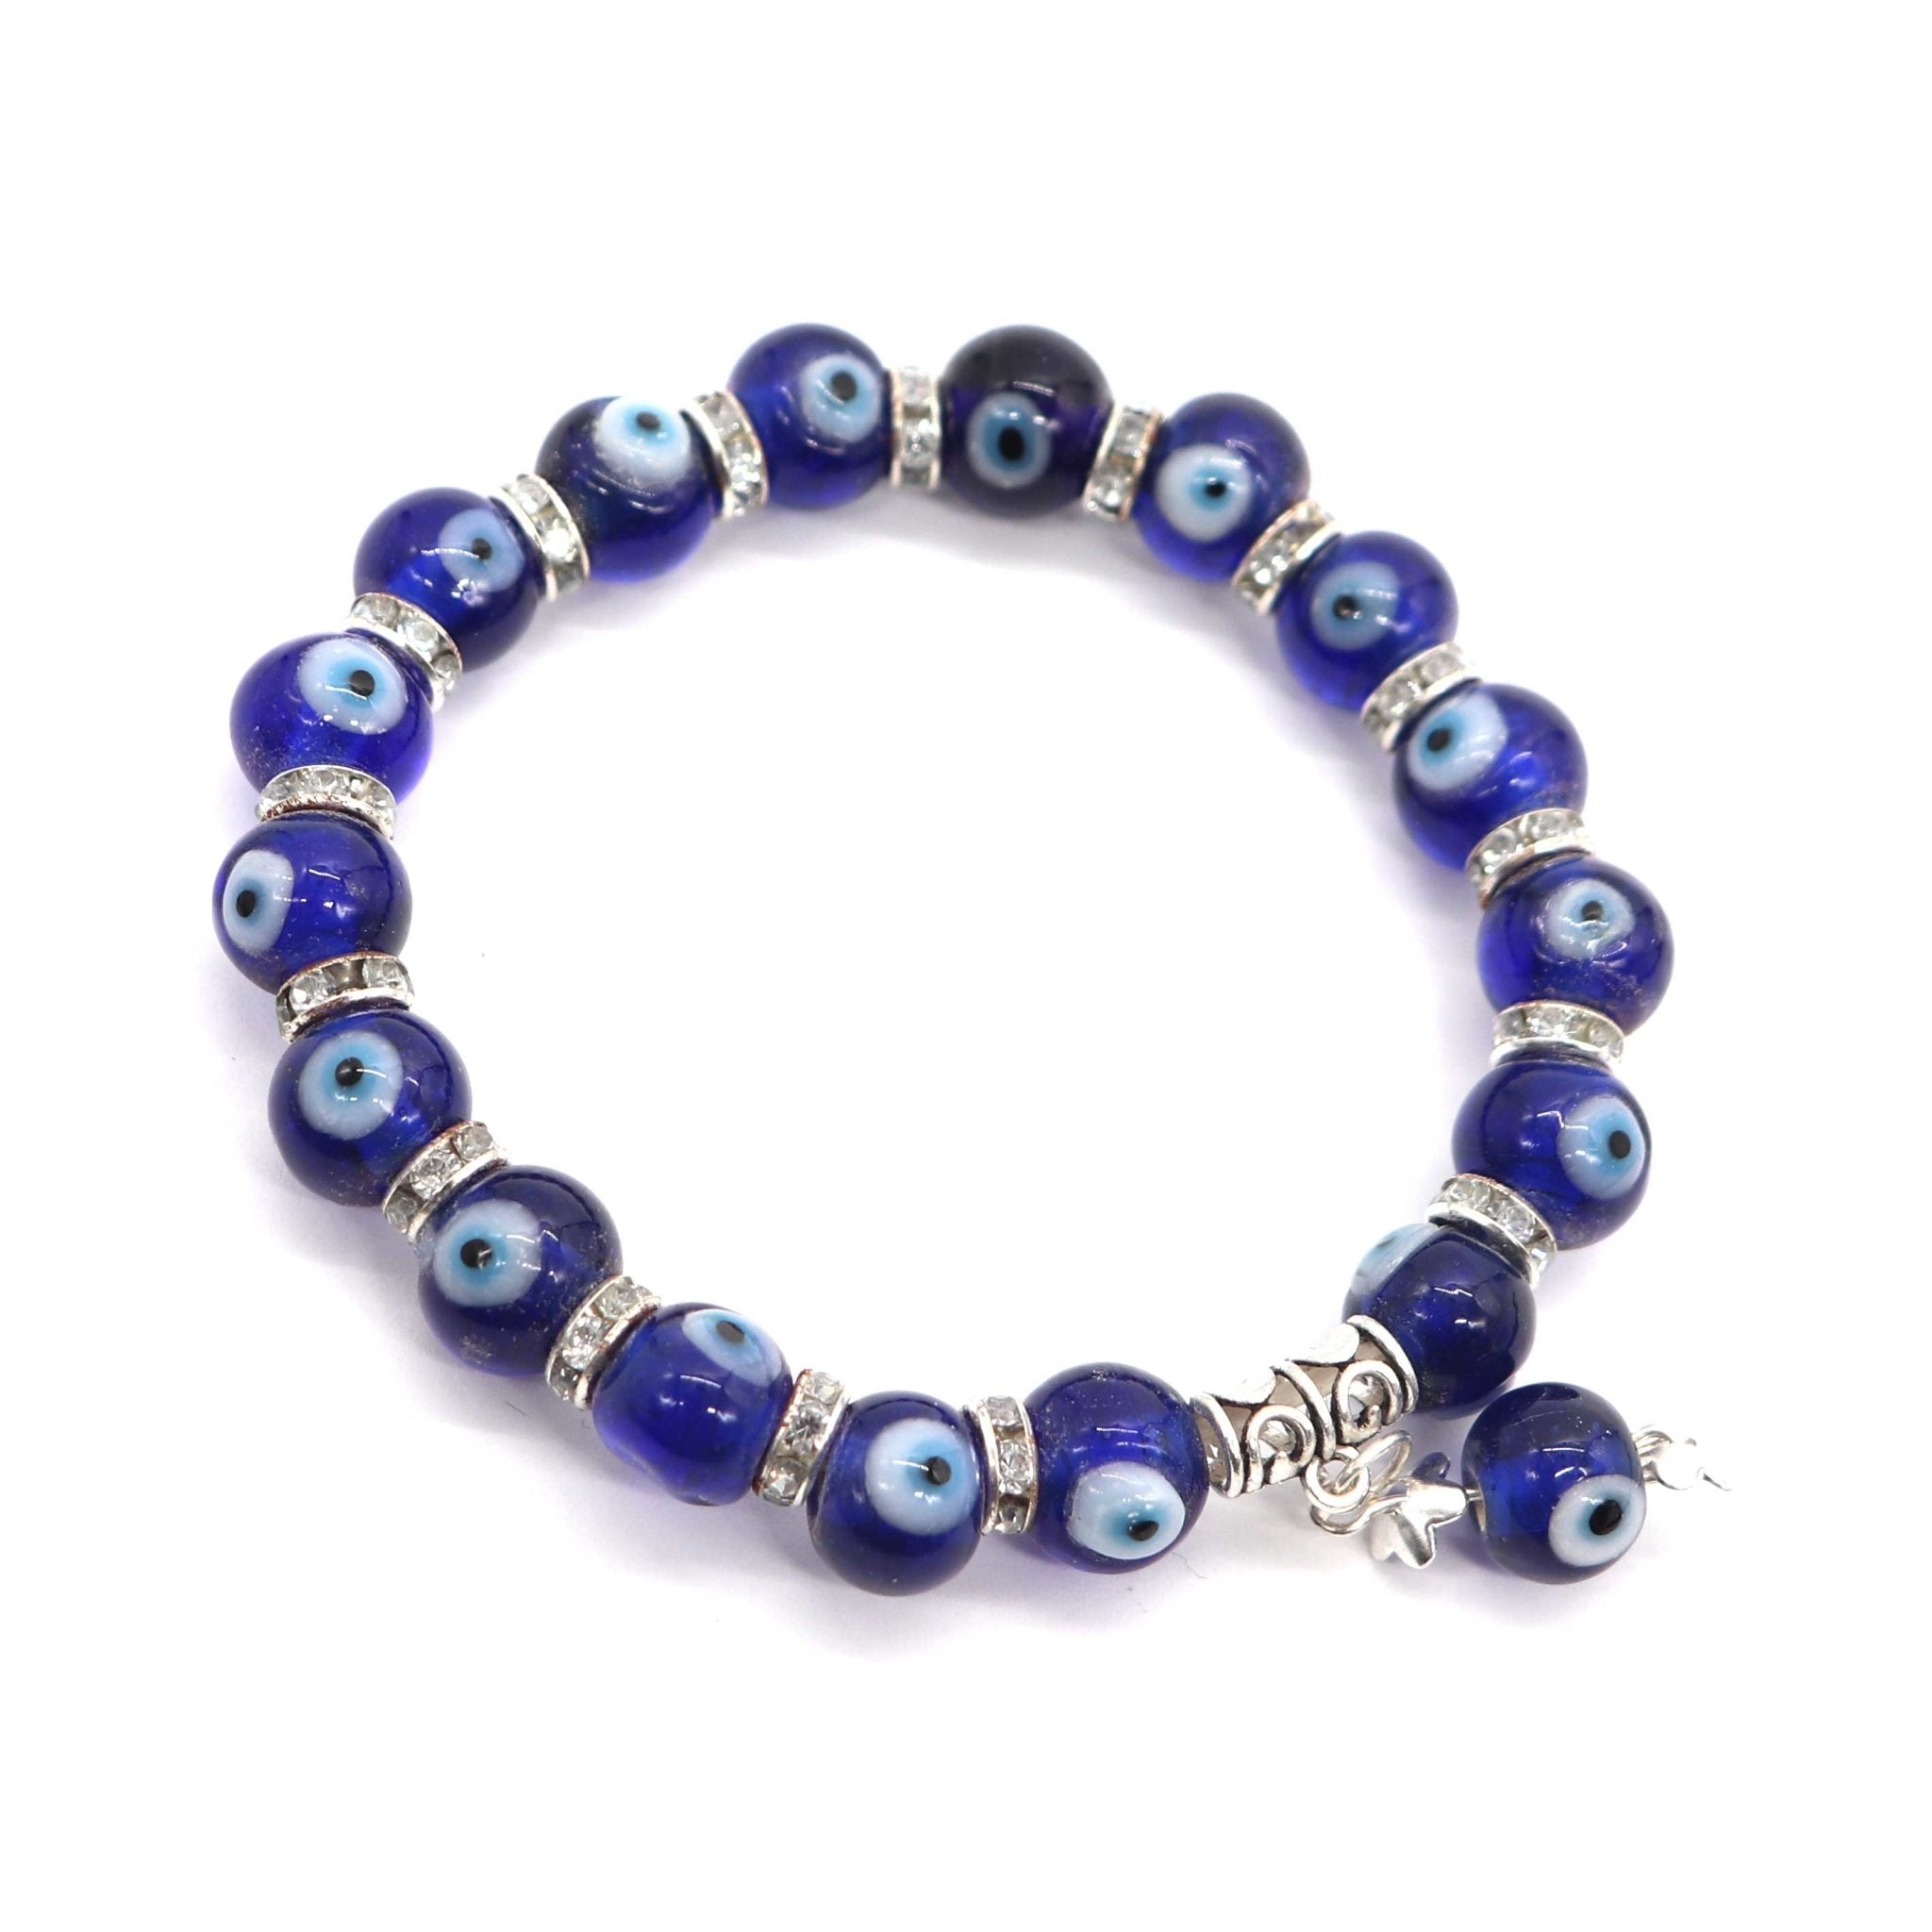 Authentic Blue Bead Evil Eye Bracelet With Cute Silver Colored Chain - Evil  Eyes India